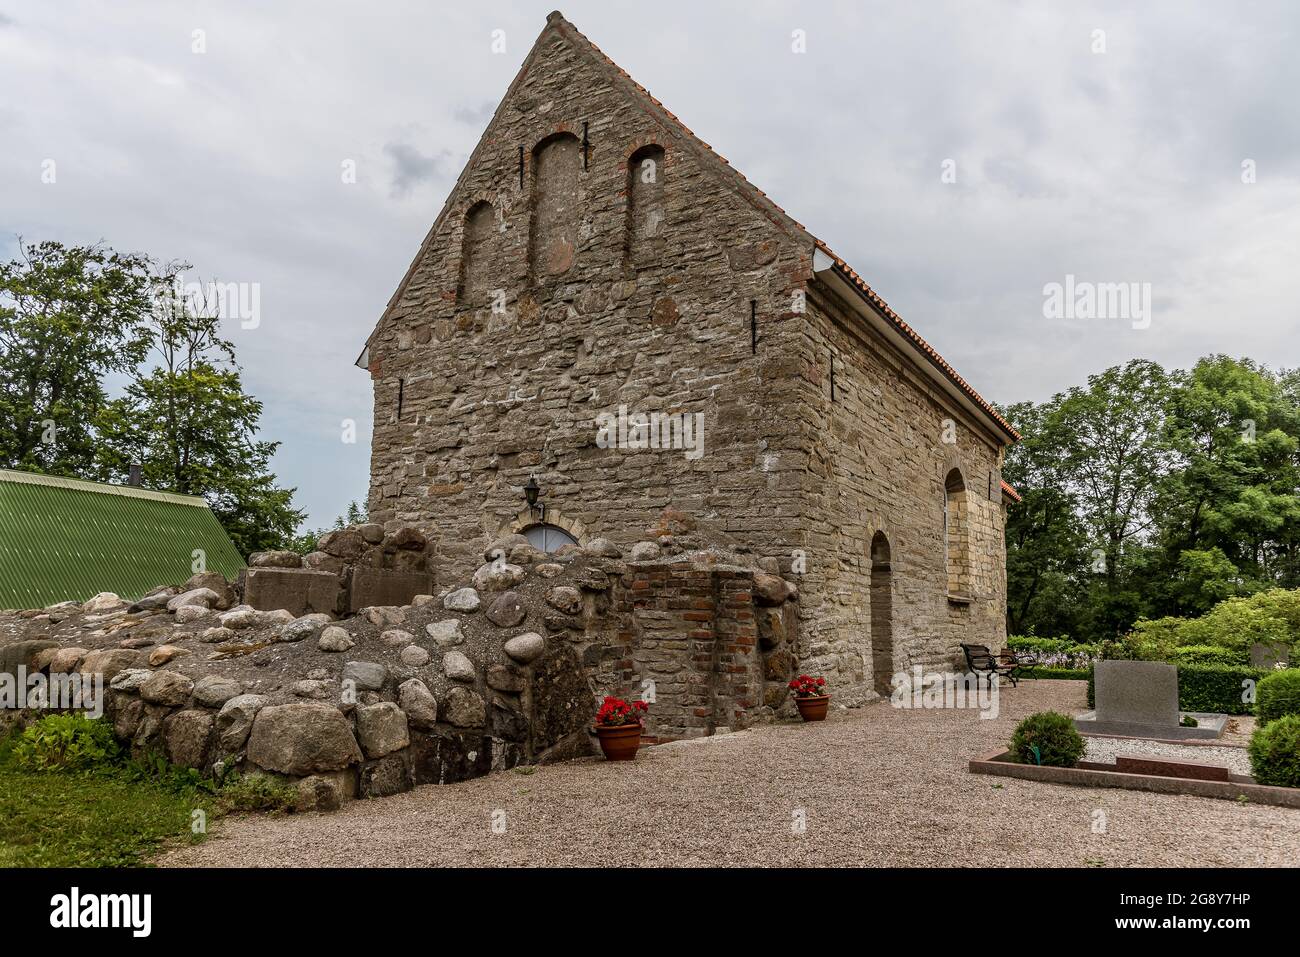 aged stone church from the early 12th century in a rural graveyard, Borrie, Sweden, July 16, 2021 Stock Photo